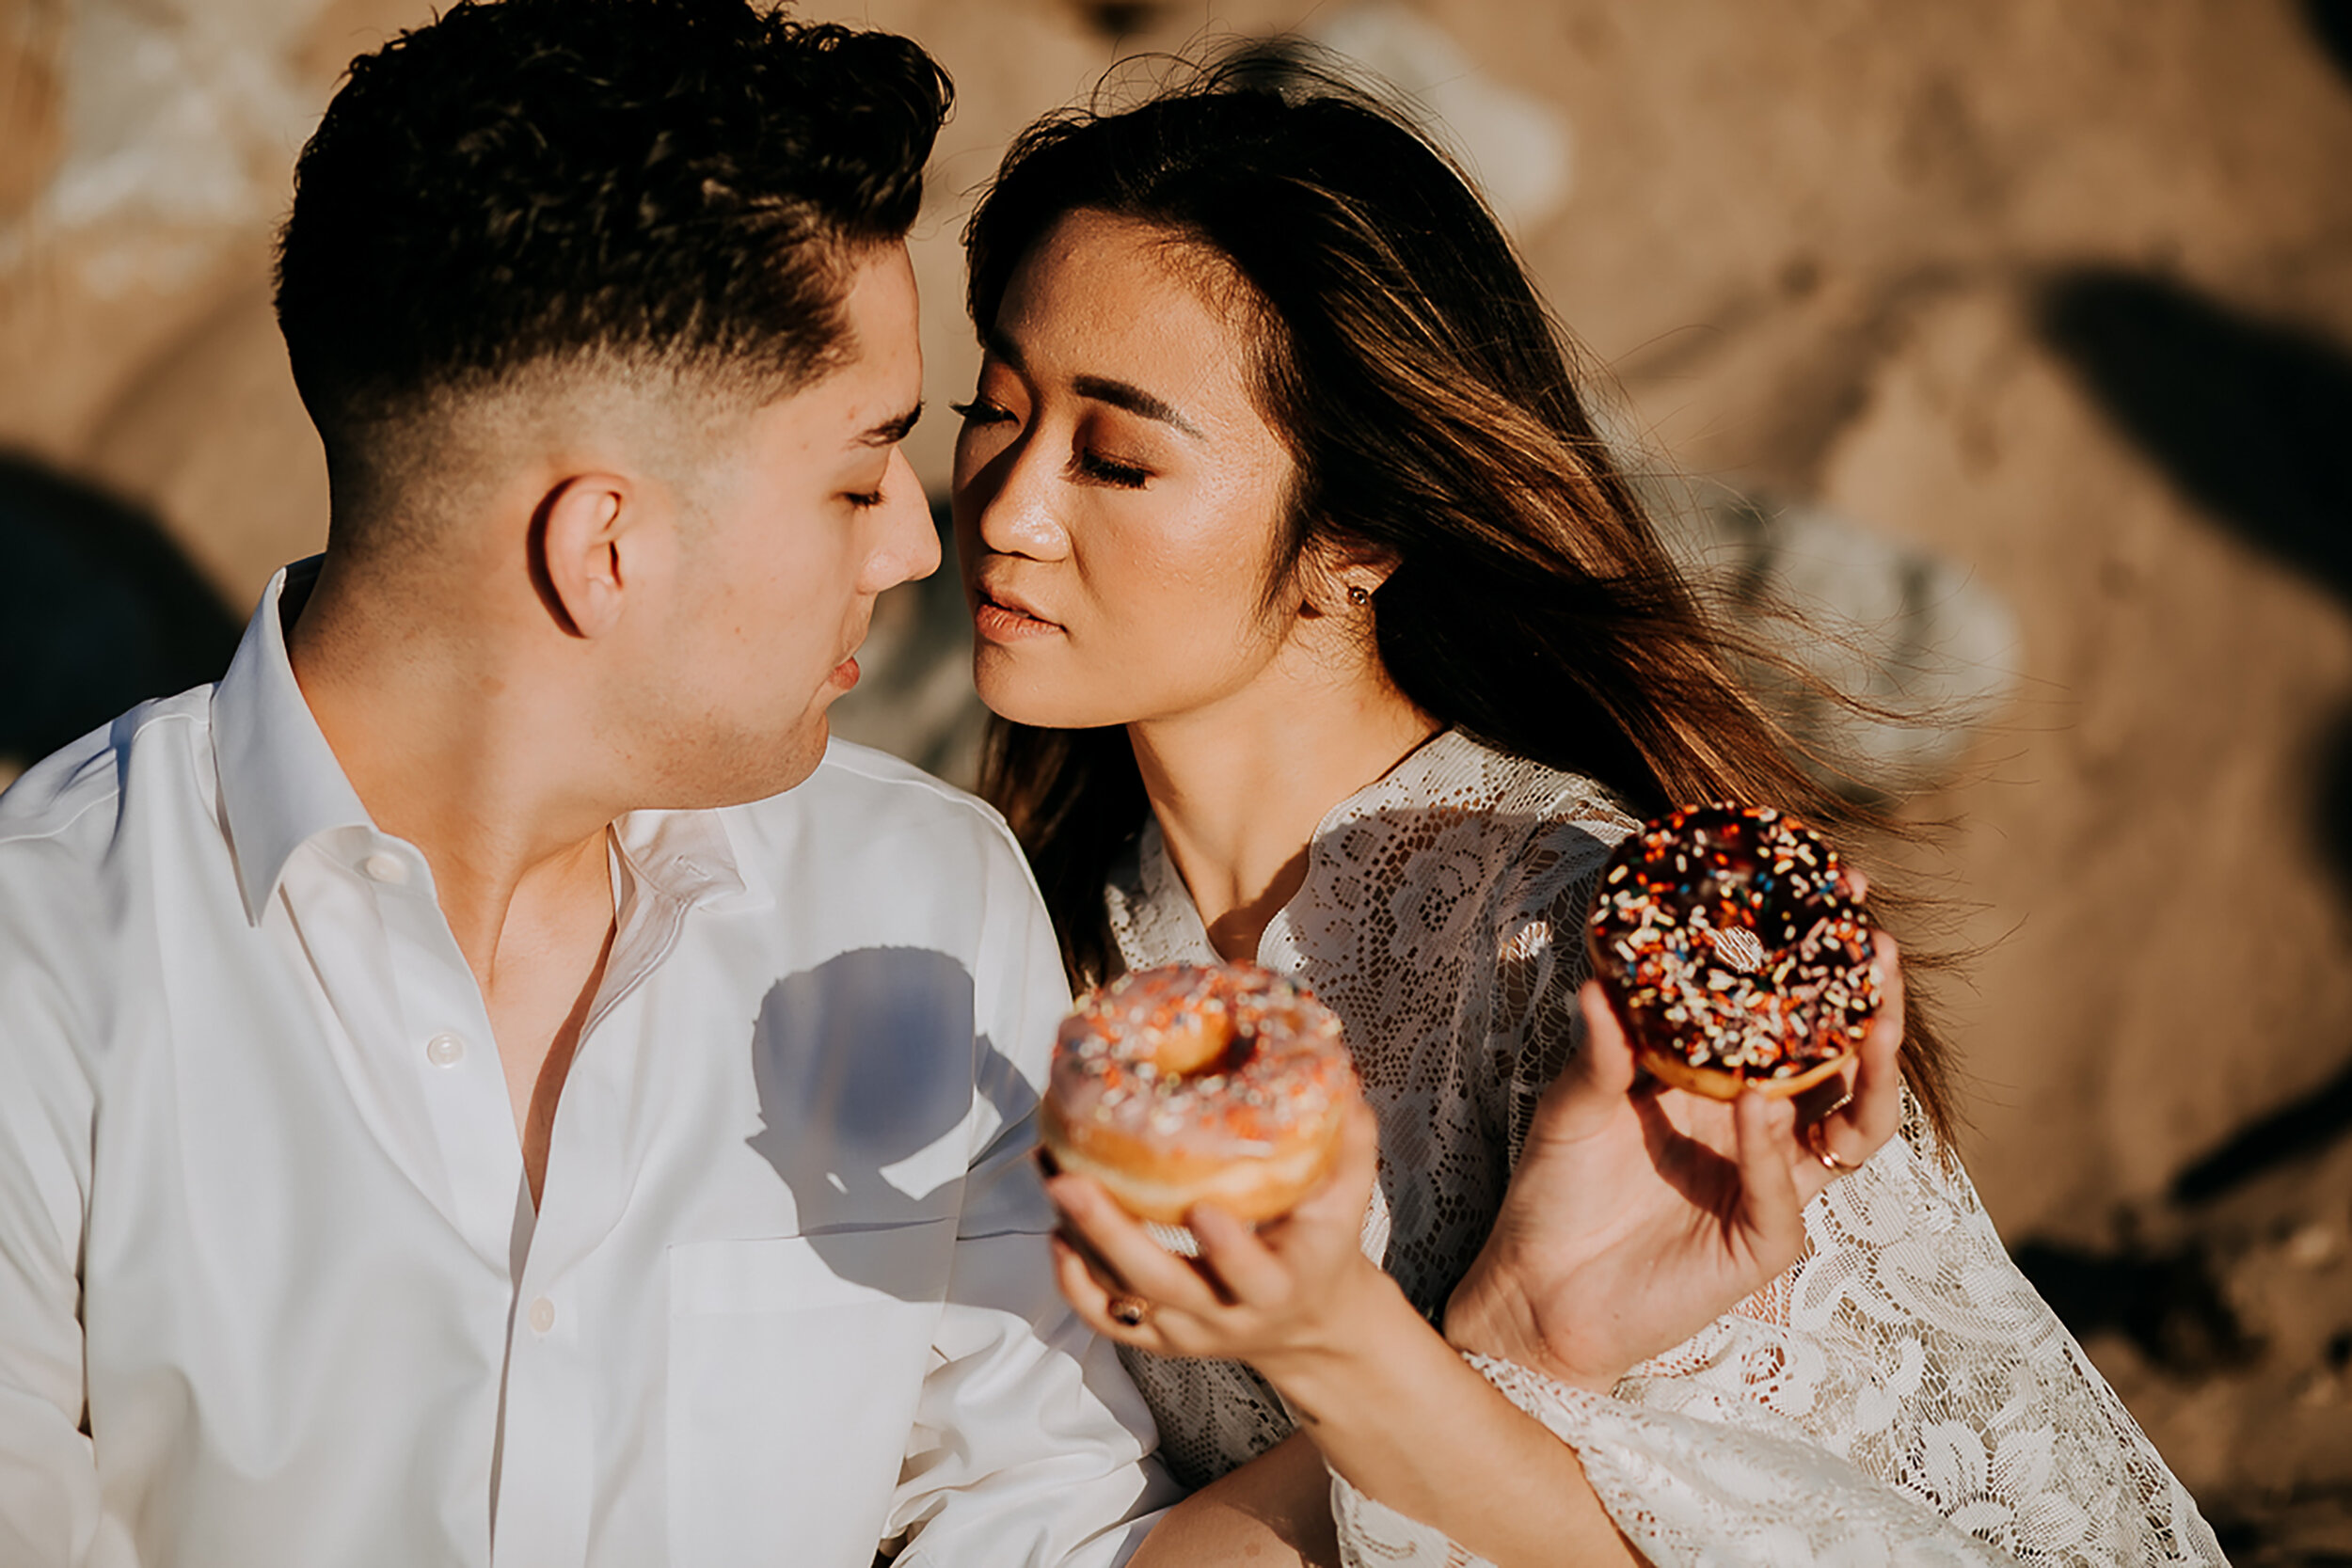  Newly eloped bride and groom celebrate wedding nuptials with sprinkled glazed donuts at Indiana Dunes State Park with Kindred &amp; Co. Photography. glazed sprinkled wedding donuts, lace bell sleeved wedding dress, casual bohemian elopement dress. w